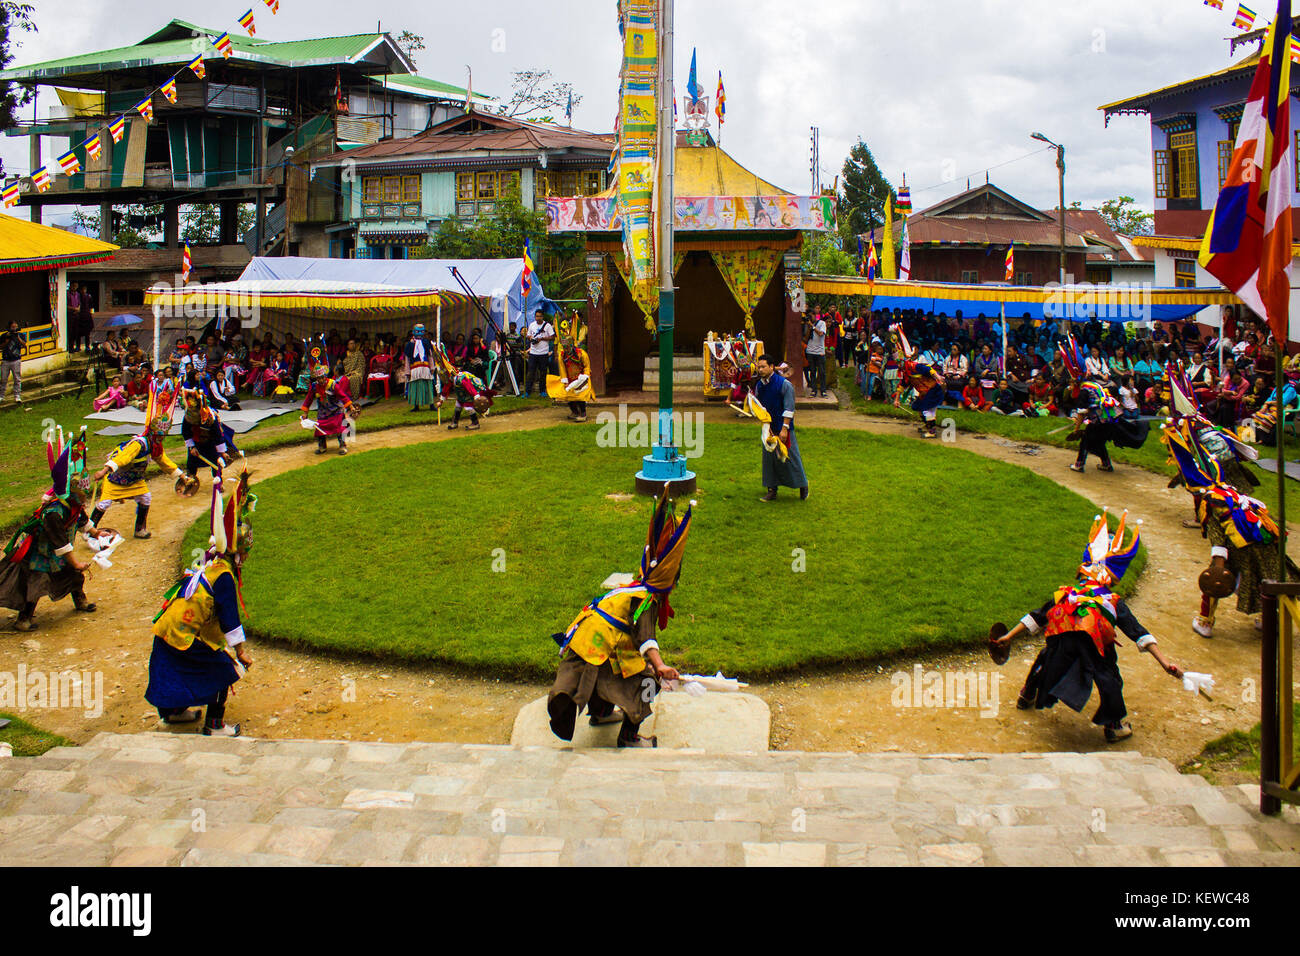 August 29, 2015 - Friendship, harmony, a lofty mountain and a wrathful deity ''” these are the four things that Pang Lhabsol, an annual festival in Sikkim, is about. The peaceful hill-state was once torn apart by strife and enmity between the Lepchas and the Bhutias (of Tibetan origin). Locals believe that Pang Lhabsol was first celebrated sometime in the 13th century to mark the beginning of peaceful relations between the warring groups. Lepcha chief Thekongtek and Tibetan crown prince Khya Bumsa erected nine slabs at Kabilunchok (near Gangtok, the current capital), tied animal intestines aro Stock Photo